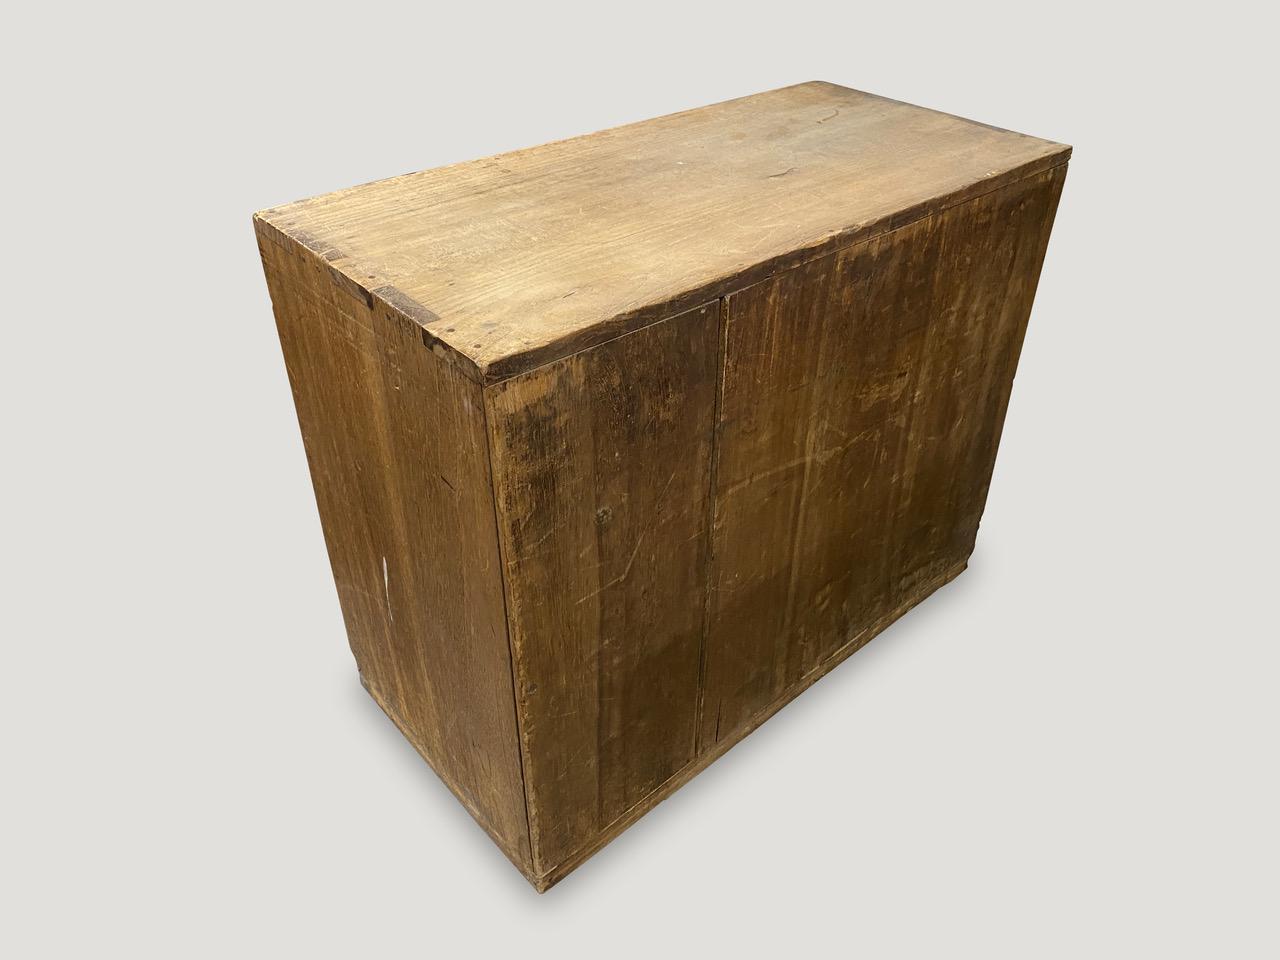 Andrianna Shamaris Antique Japanese Wabi Sabi Wood Tansu Chest In Distressed Condition In New York, NY